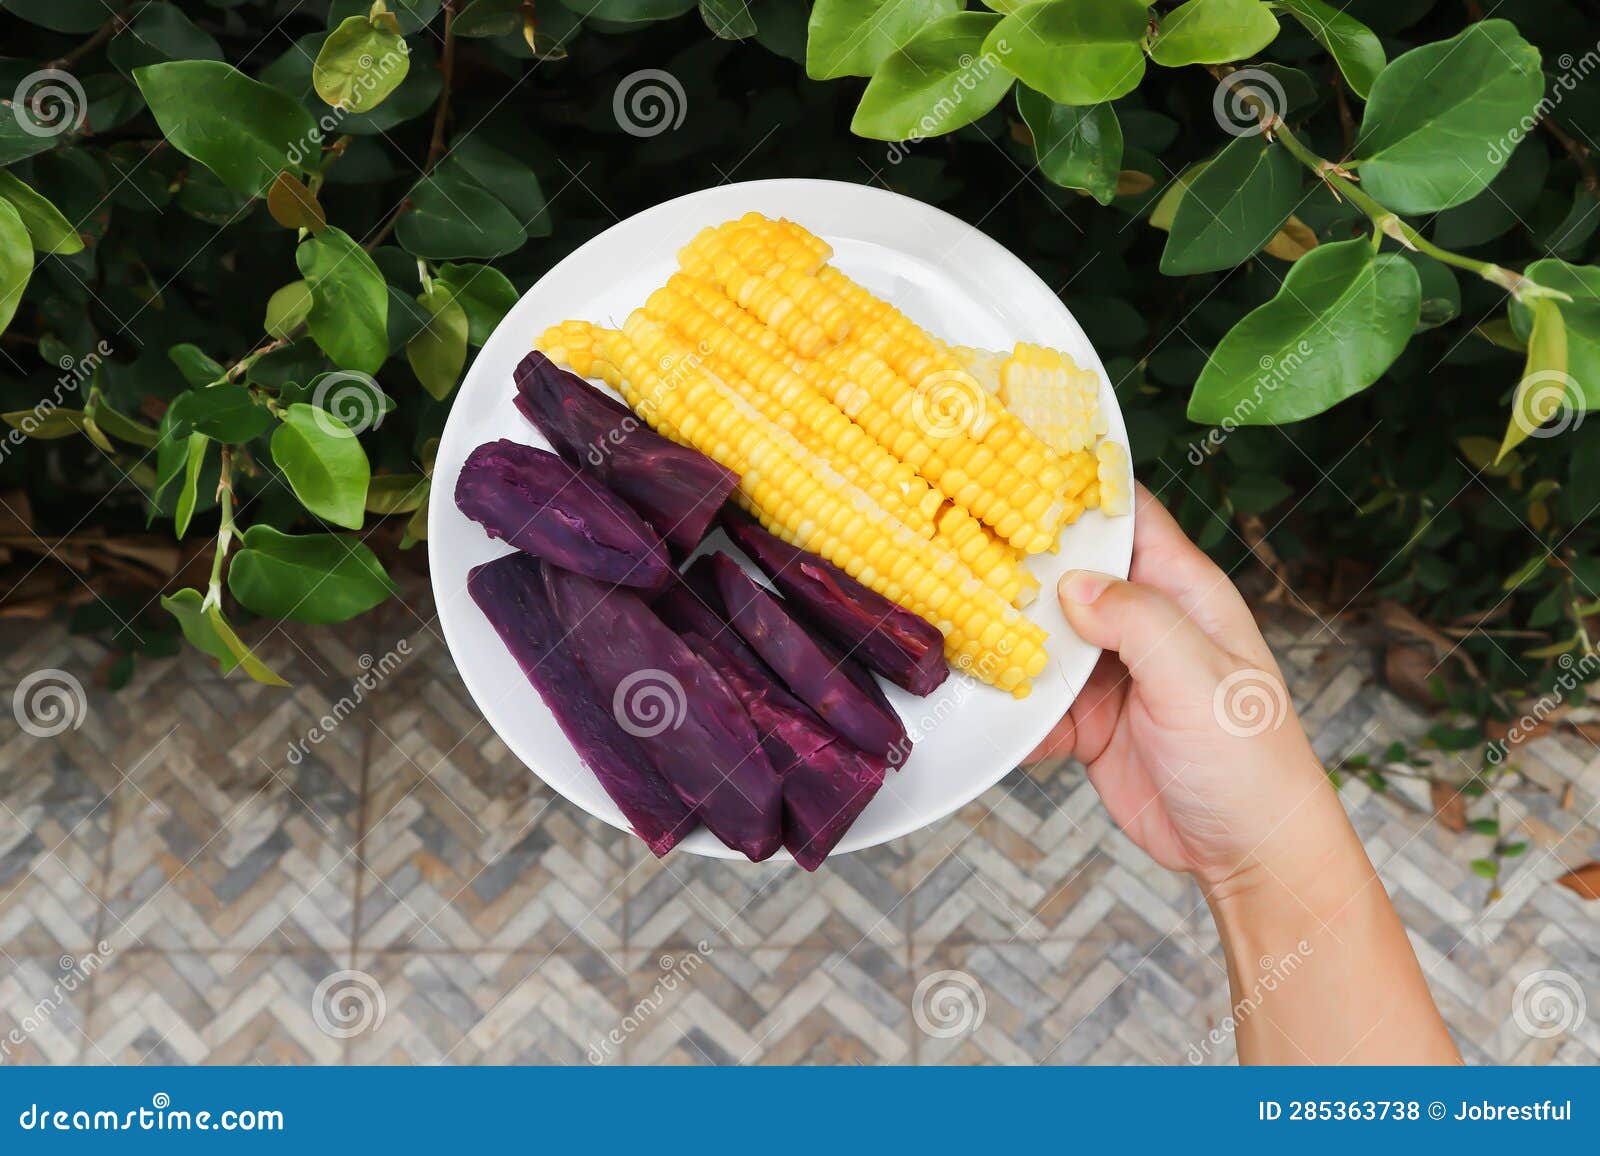 Steamed Corn and Steamed Purple Sweet Potato Stock Photo - Image of ...